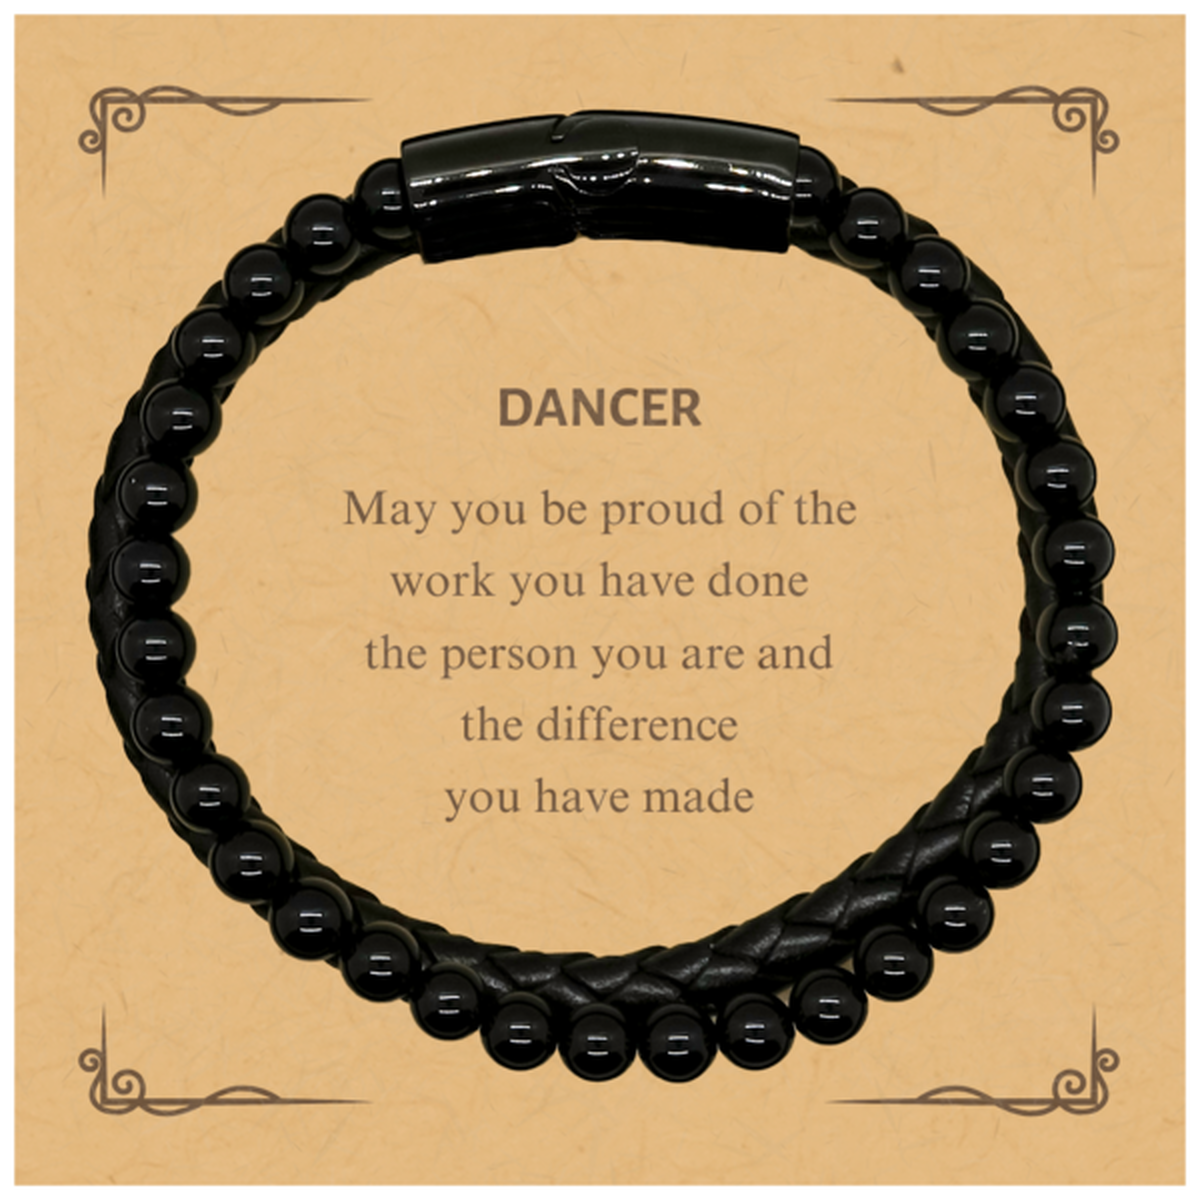 Dancer May you be proud of the work you have done, Retirement Dancer Stone Leather Bracelets for Colleague Appreciation Gifts Amazing for Dancer